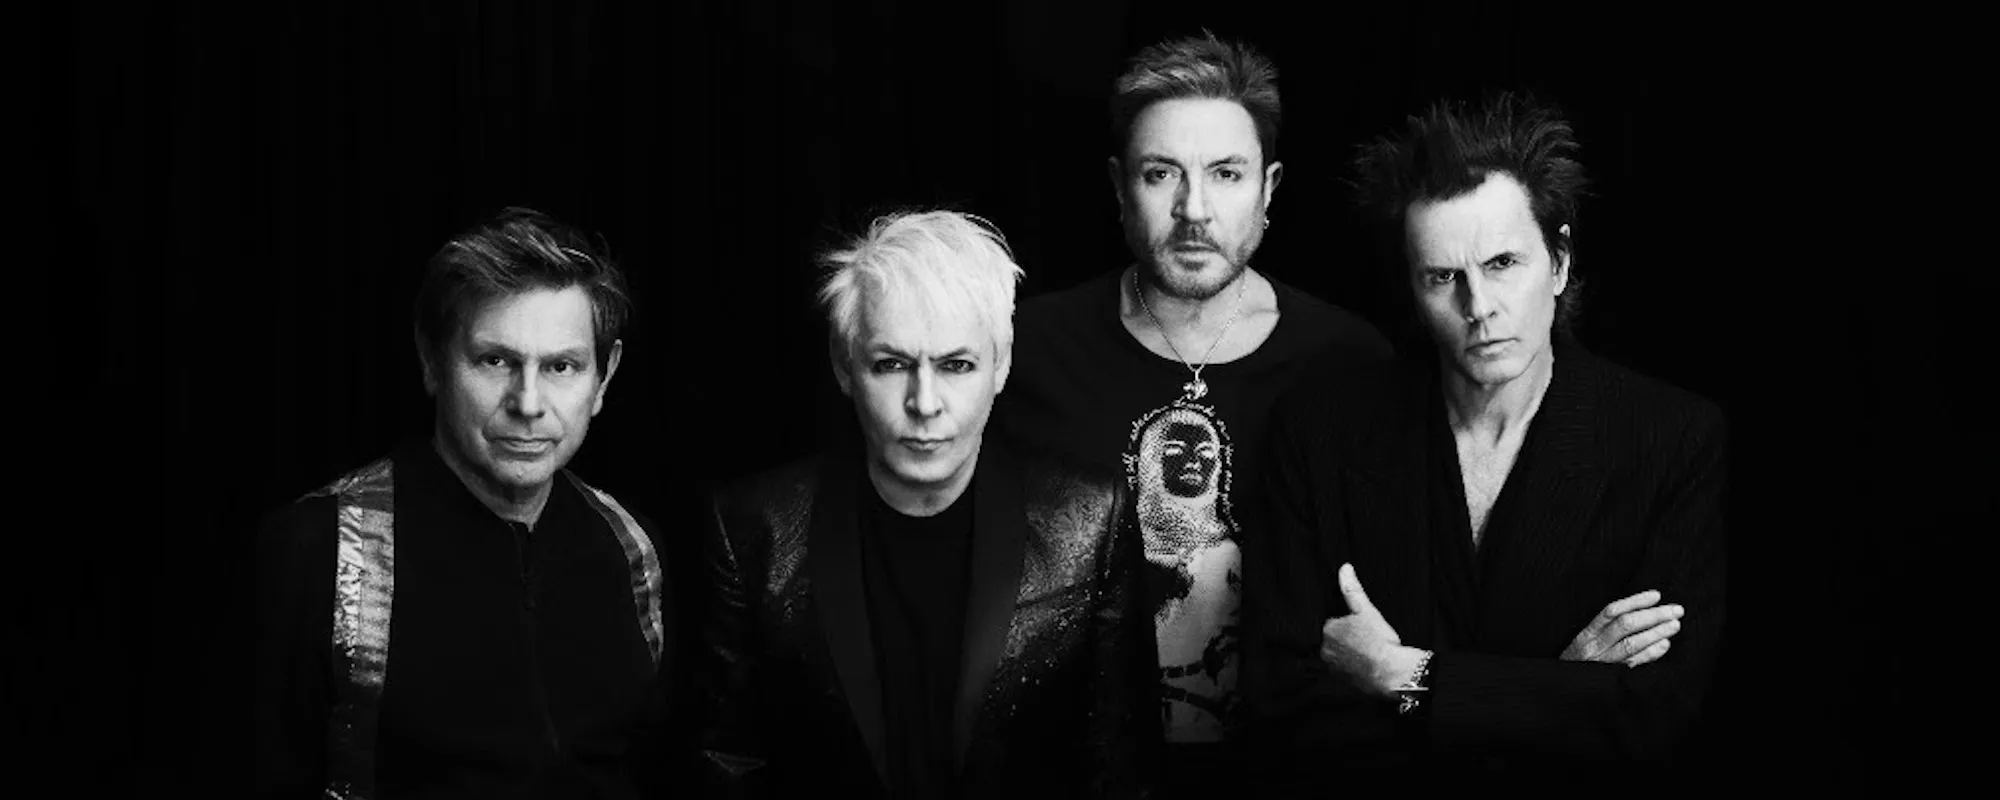 Review: Duran Duran Deliver Tales from the Darker Side on ‘Danse Macabre’